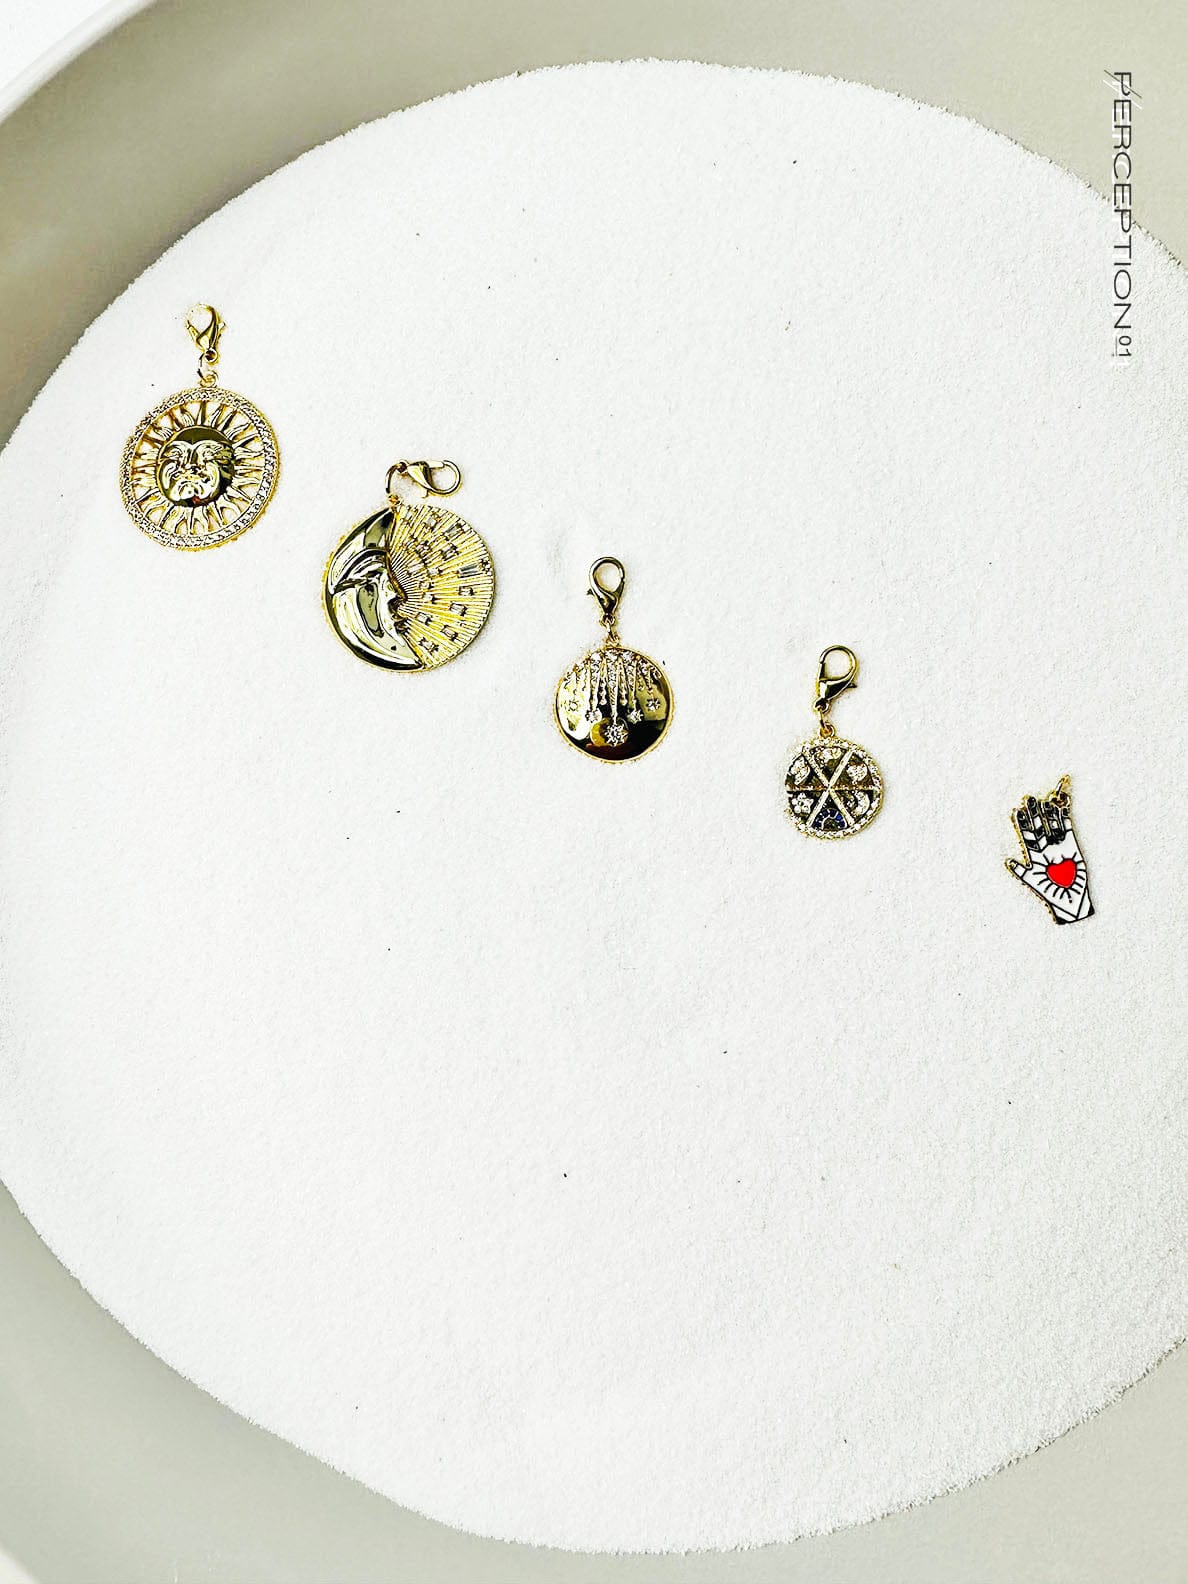 Celestial Charms (Each Sold Separately) - attach  to any Charm Bracelet or Necklace - Perception0one.com